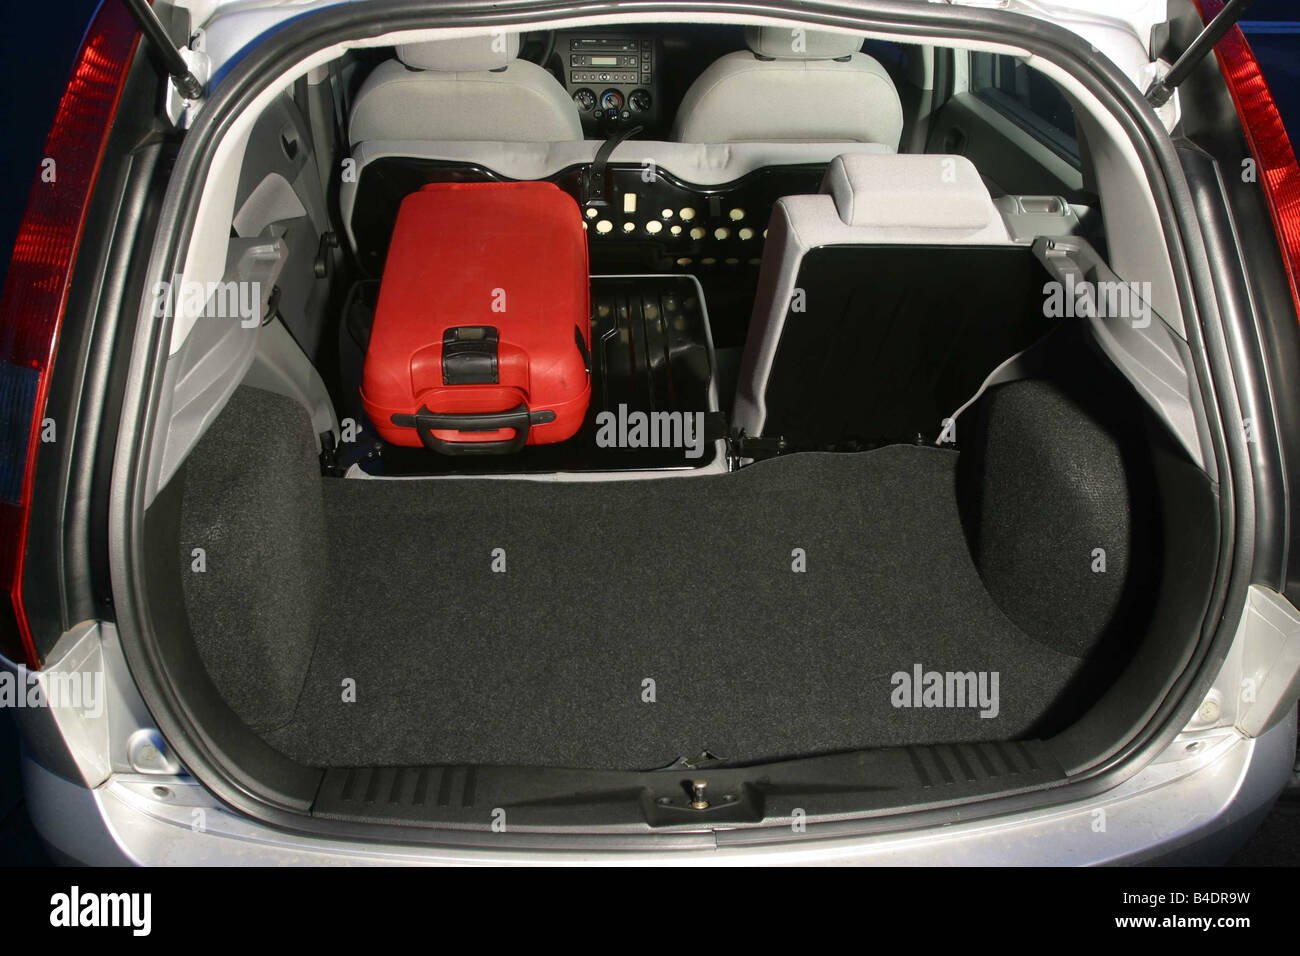 Car, Ford Fiesta 1.4 16V, small approx., model year 2002-, silver,  Limousine, view into boot, technique/accessory, accessories Stock Photo -  Alamy